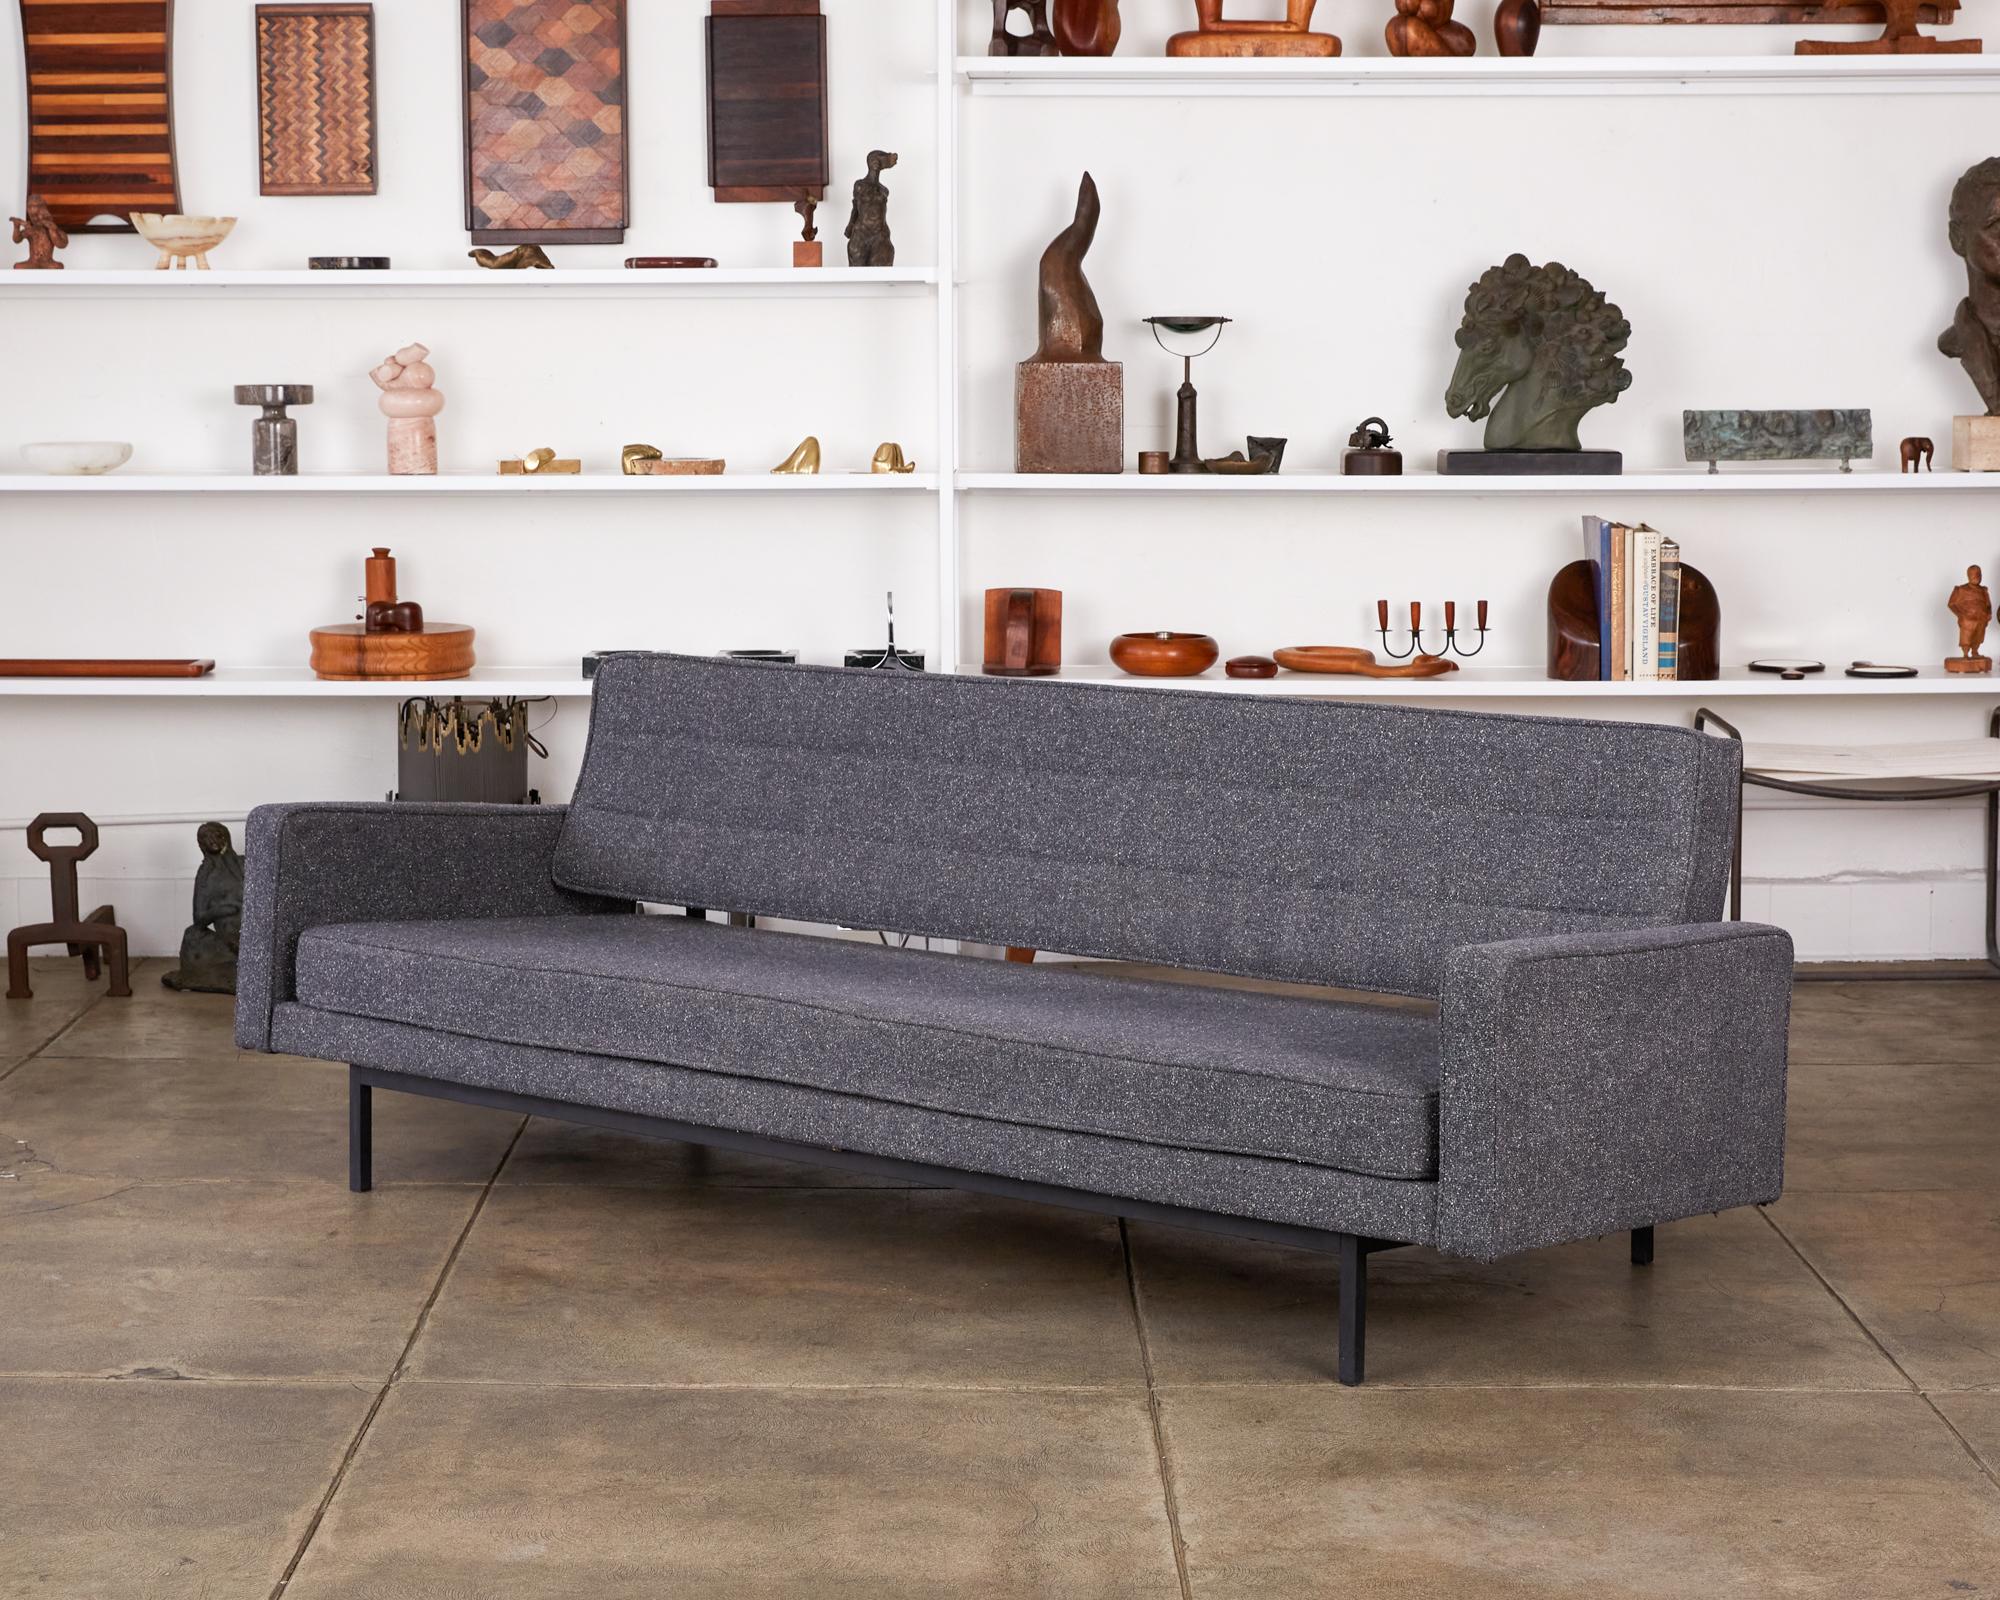 Richard Schultz sofa for Knoll, circa 1960s. Known primarily as a designer of outdoor furniture, Schultz designed this sofa that converts to a daybed when the situation necessitates it. Designed with very clean lines, this sleek sofa is finished in